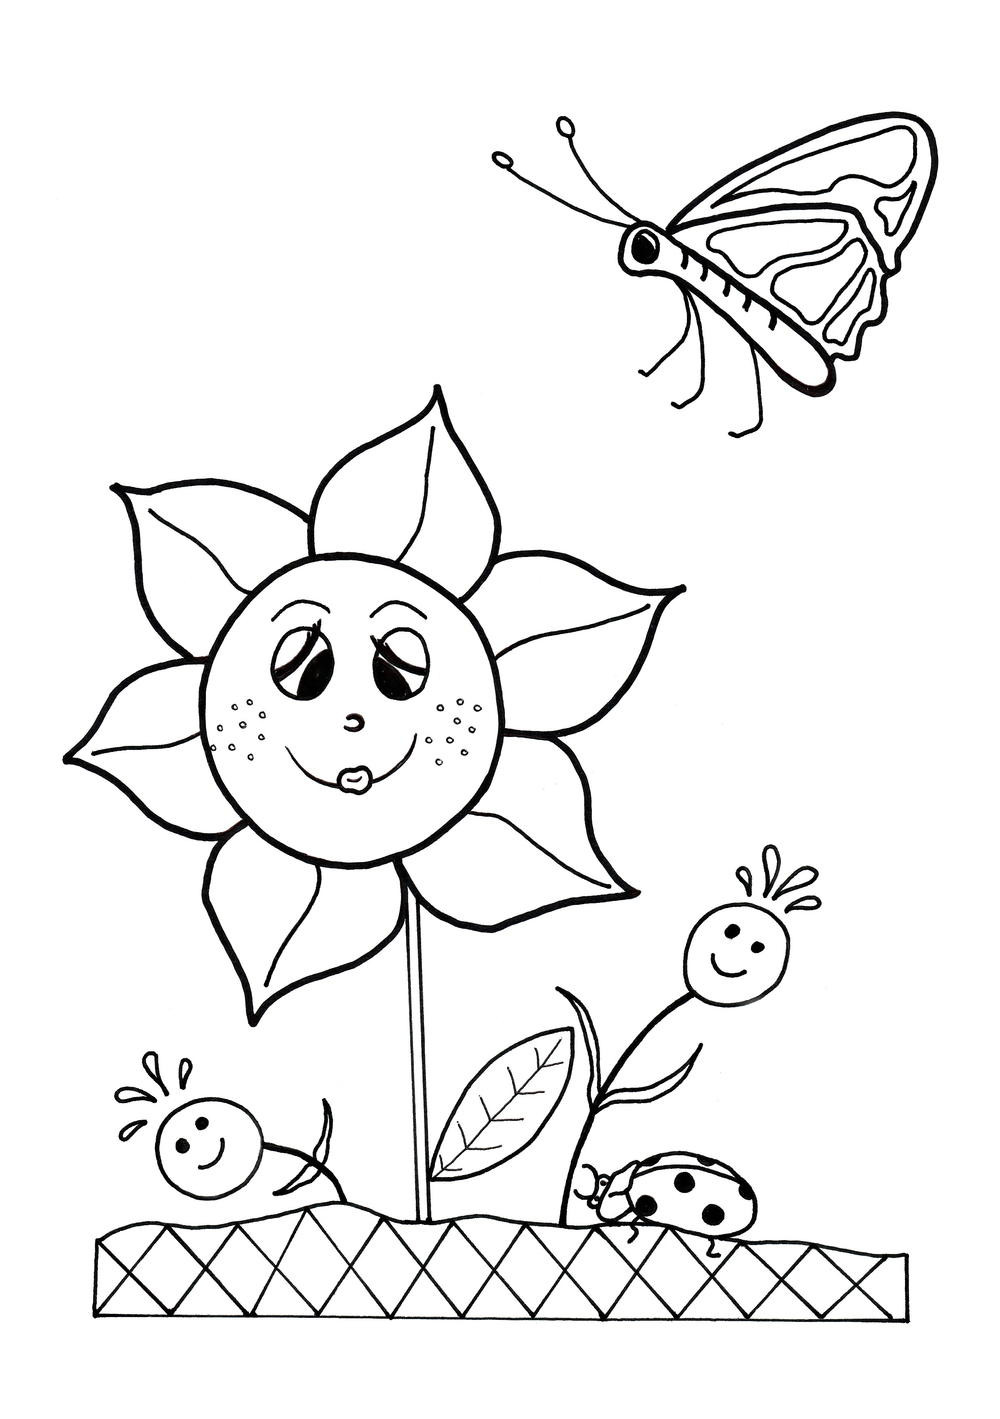 Coloring Pages For Kids Spring
 Dancing Flowers Spring Coloring Sheet